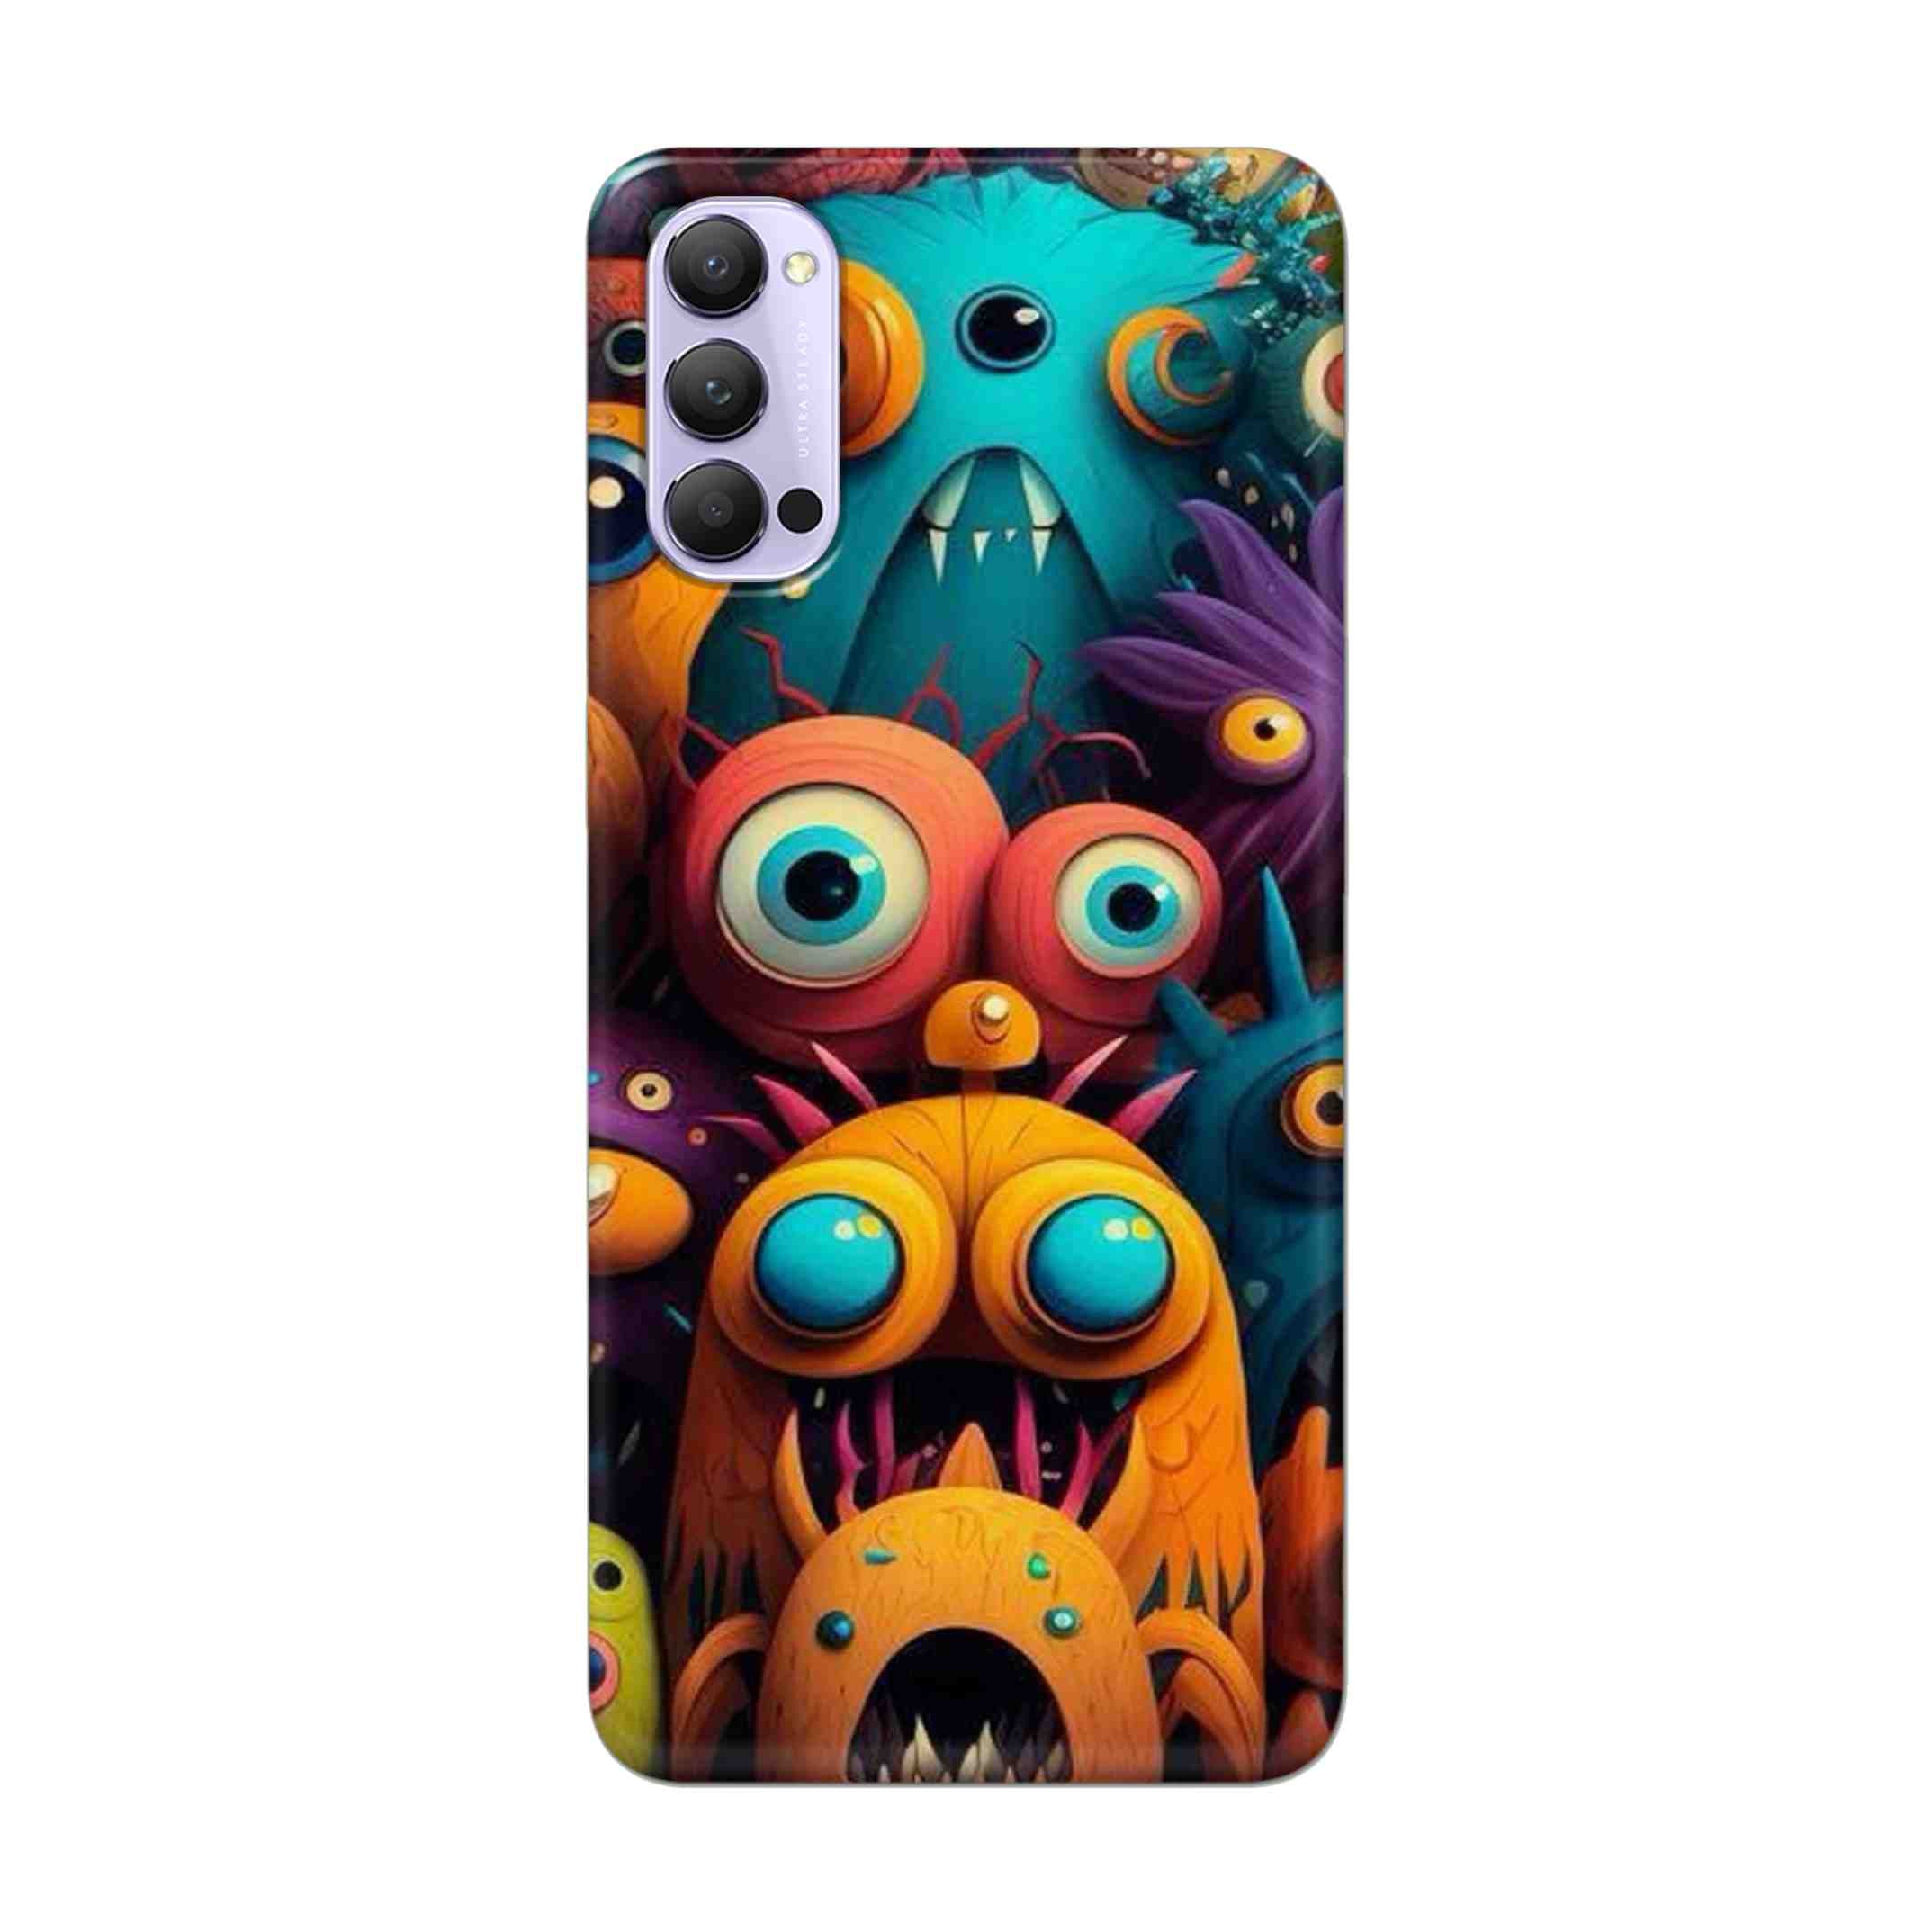 Buy Zombie Hard Back Mobile Phone Case Cover For Oppo Reno 4 Pro Online